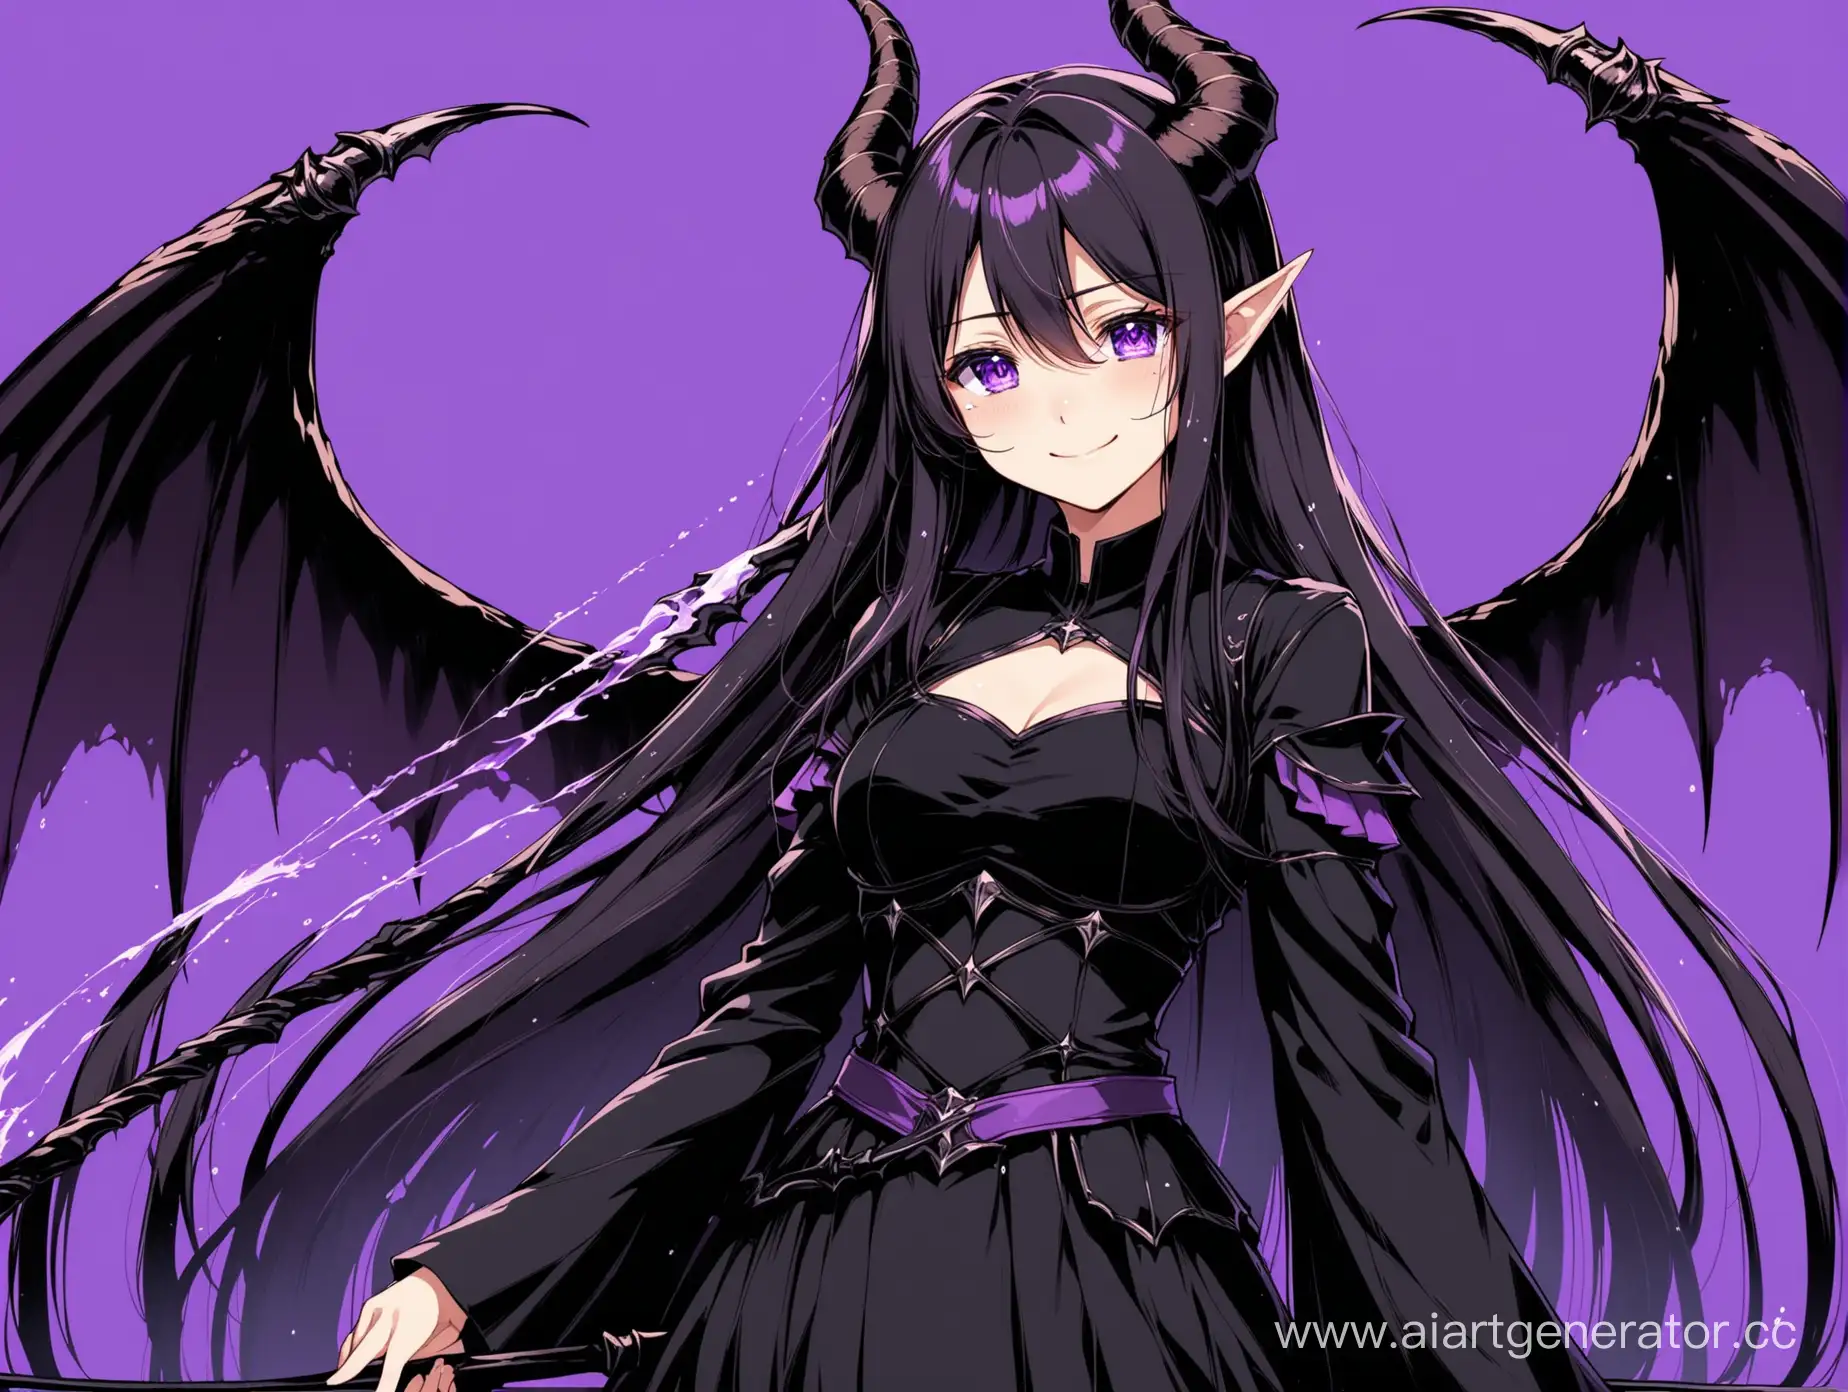 Smiling-Anime-Girl-with-Wings-and-Scythe-in-Purple-Setting